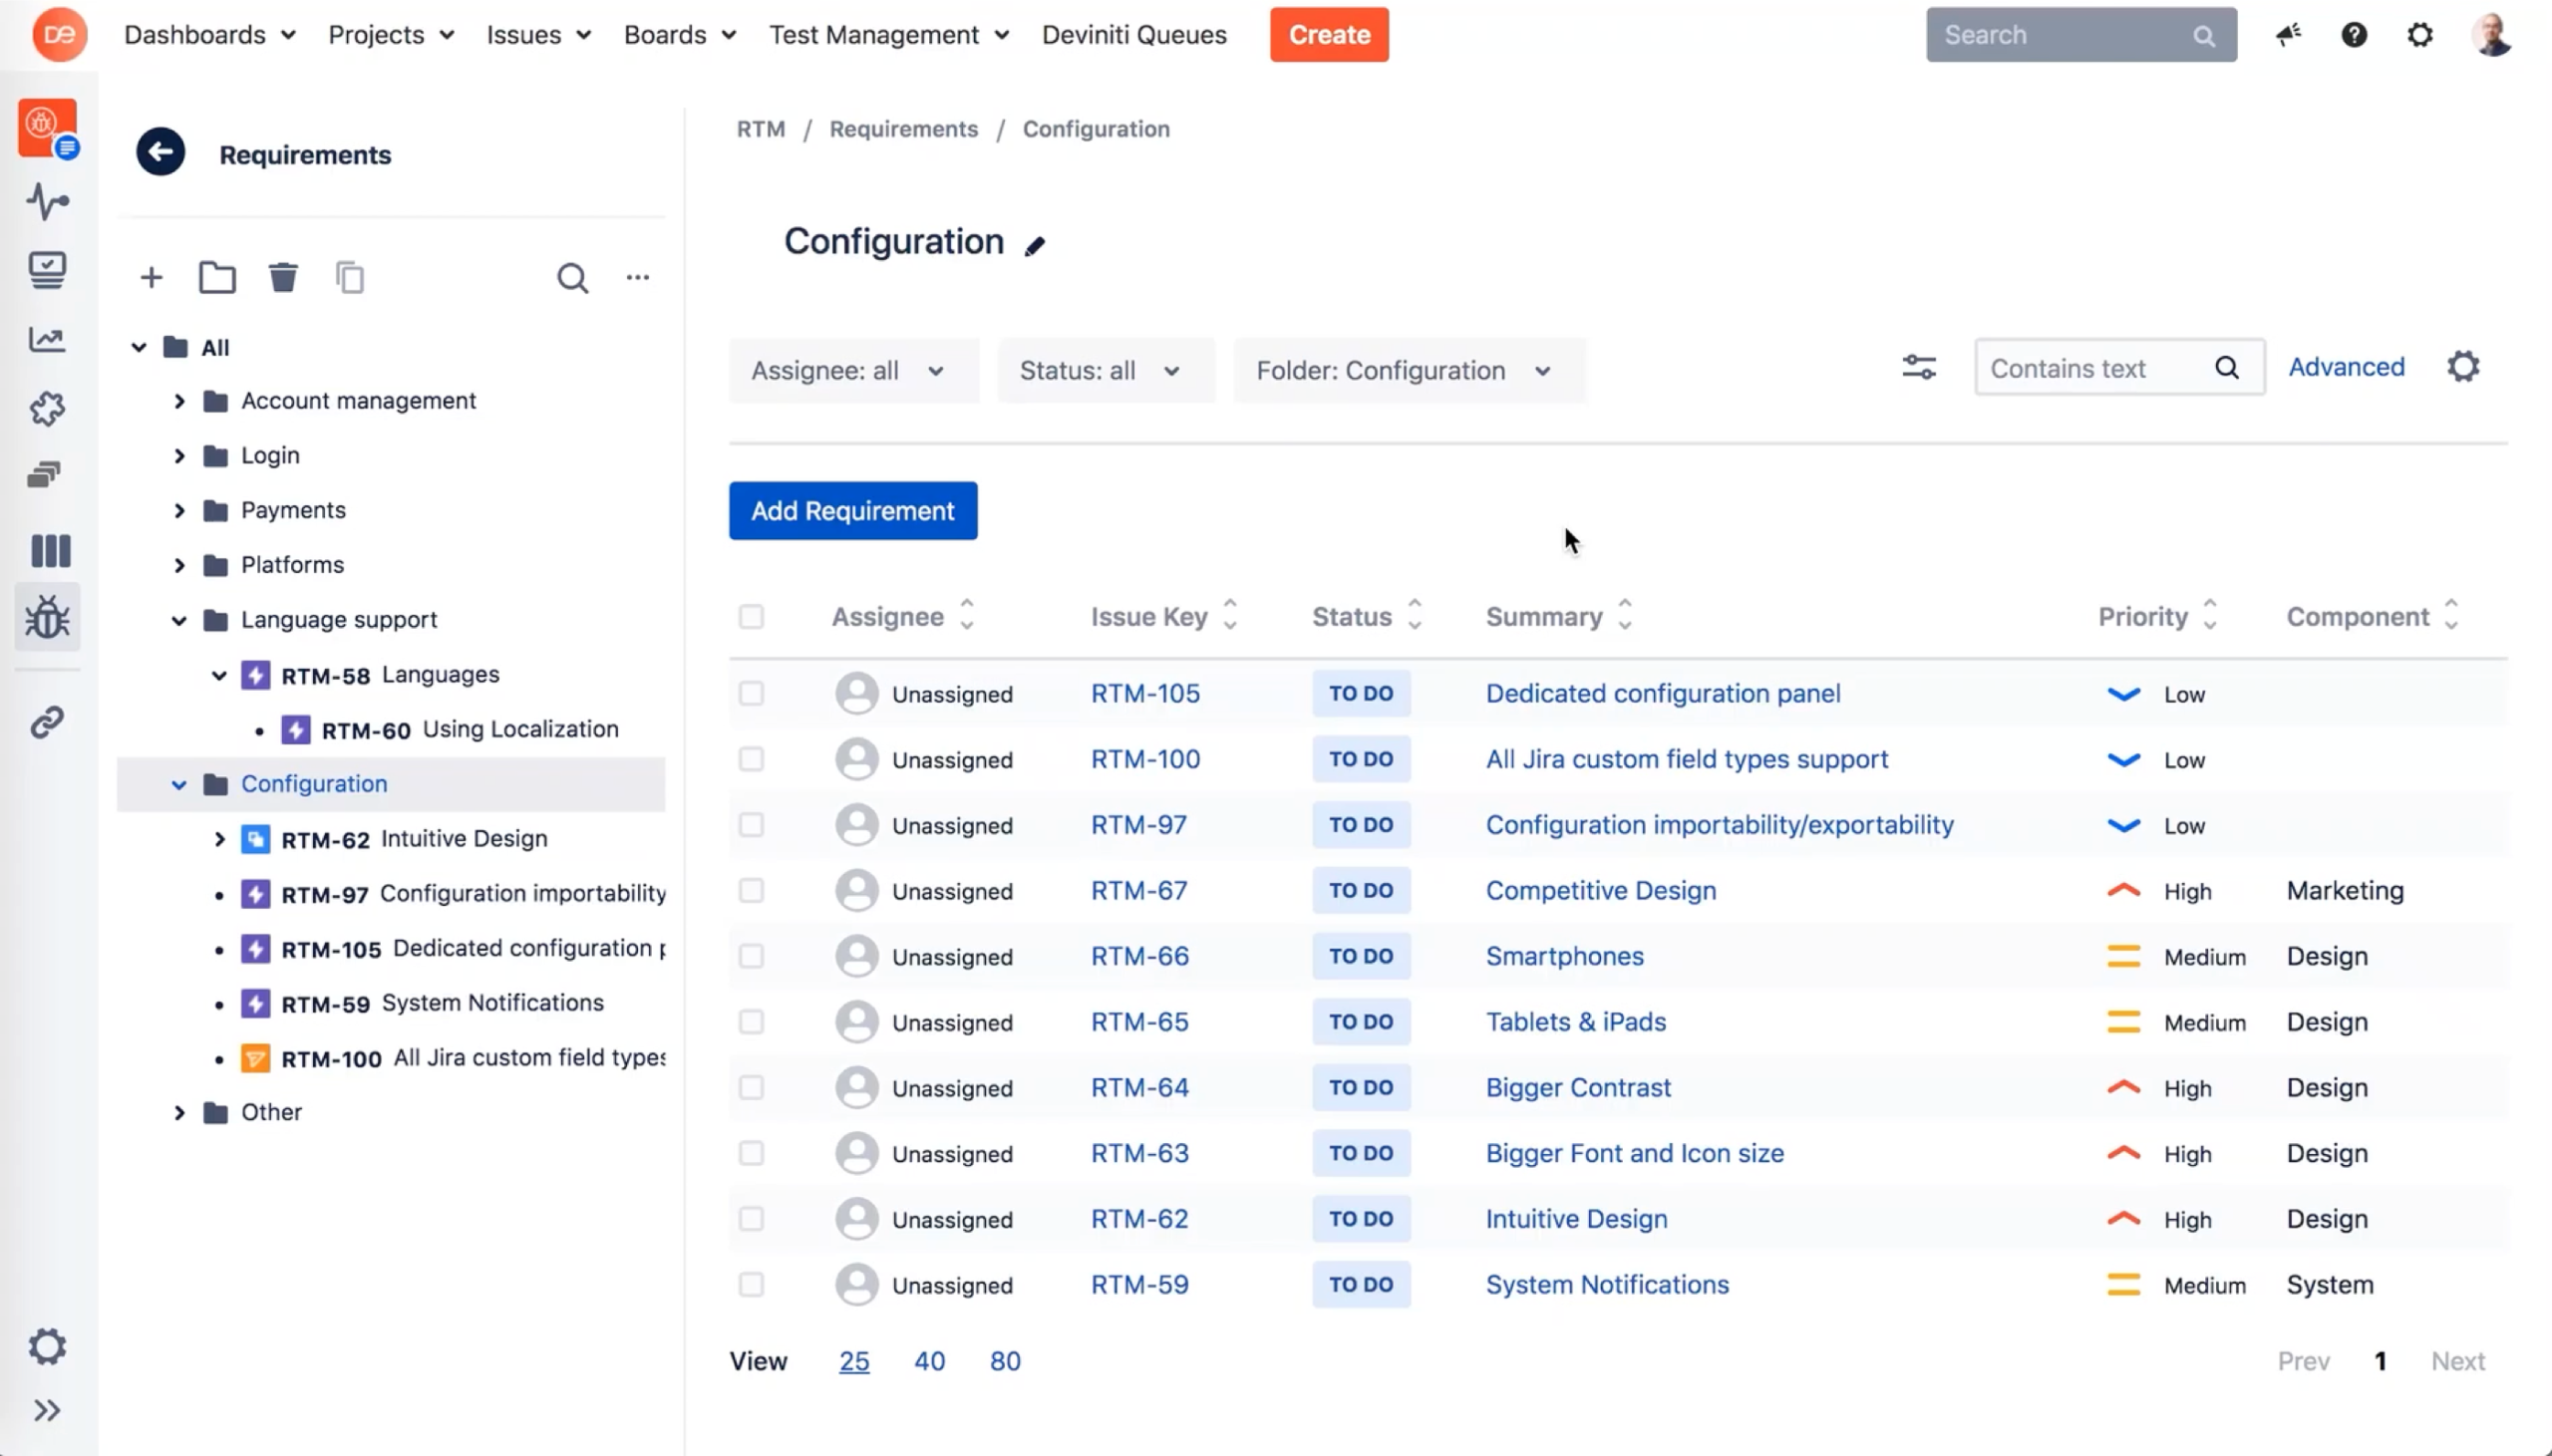 Requirements analysis in RTM for Jira